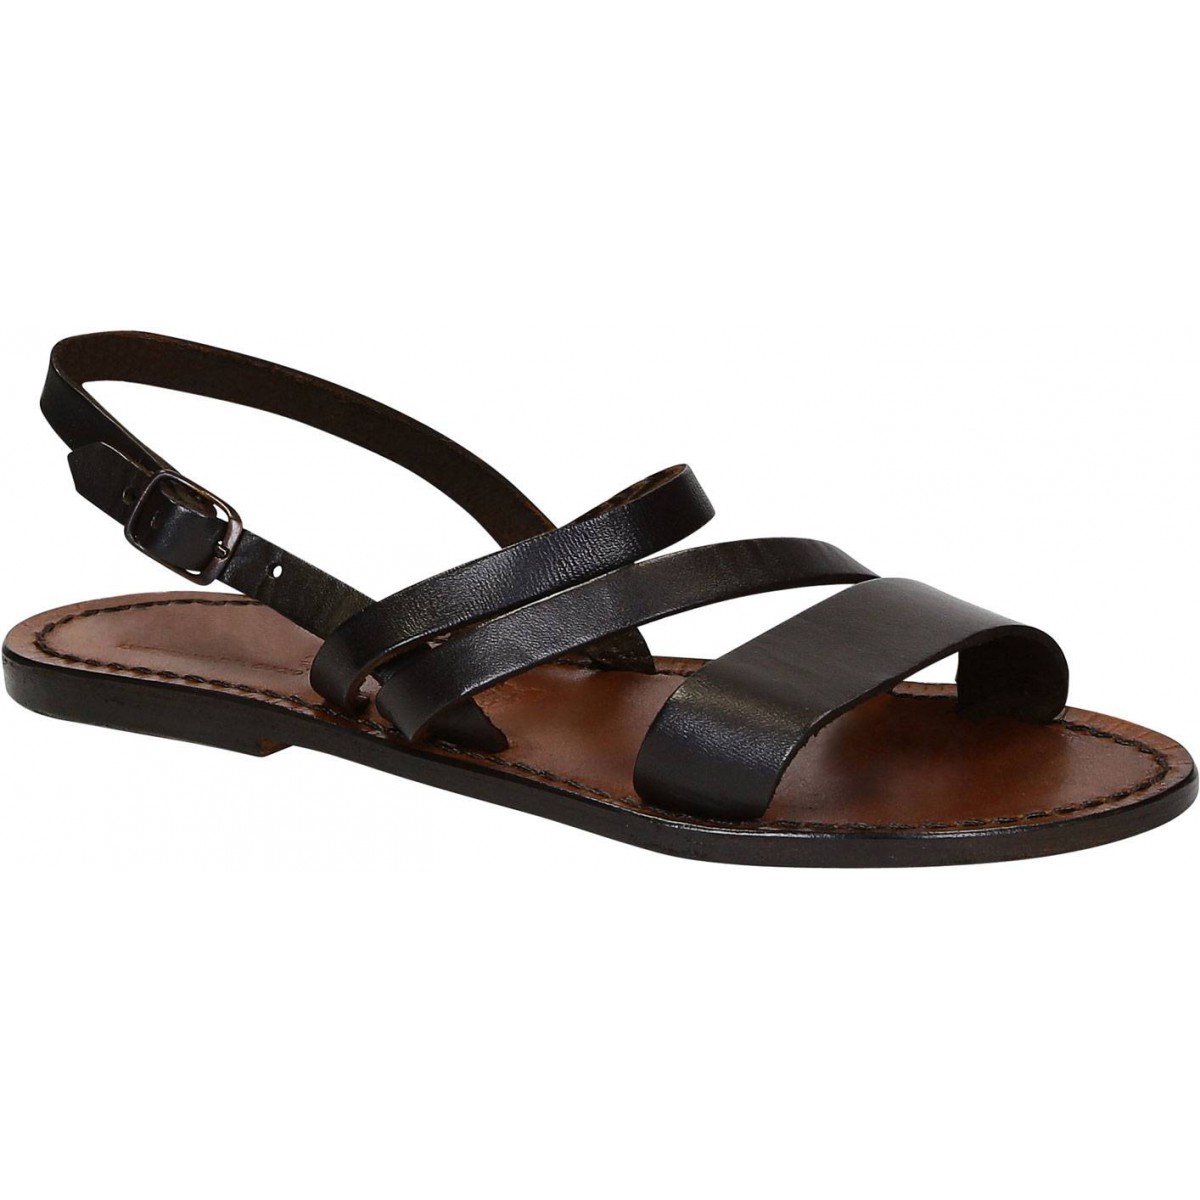 Buy > leather flat sandals for women > in stock